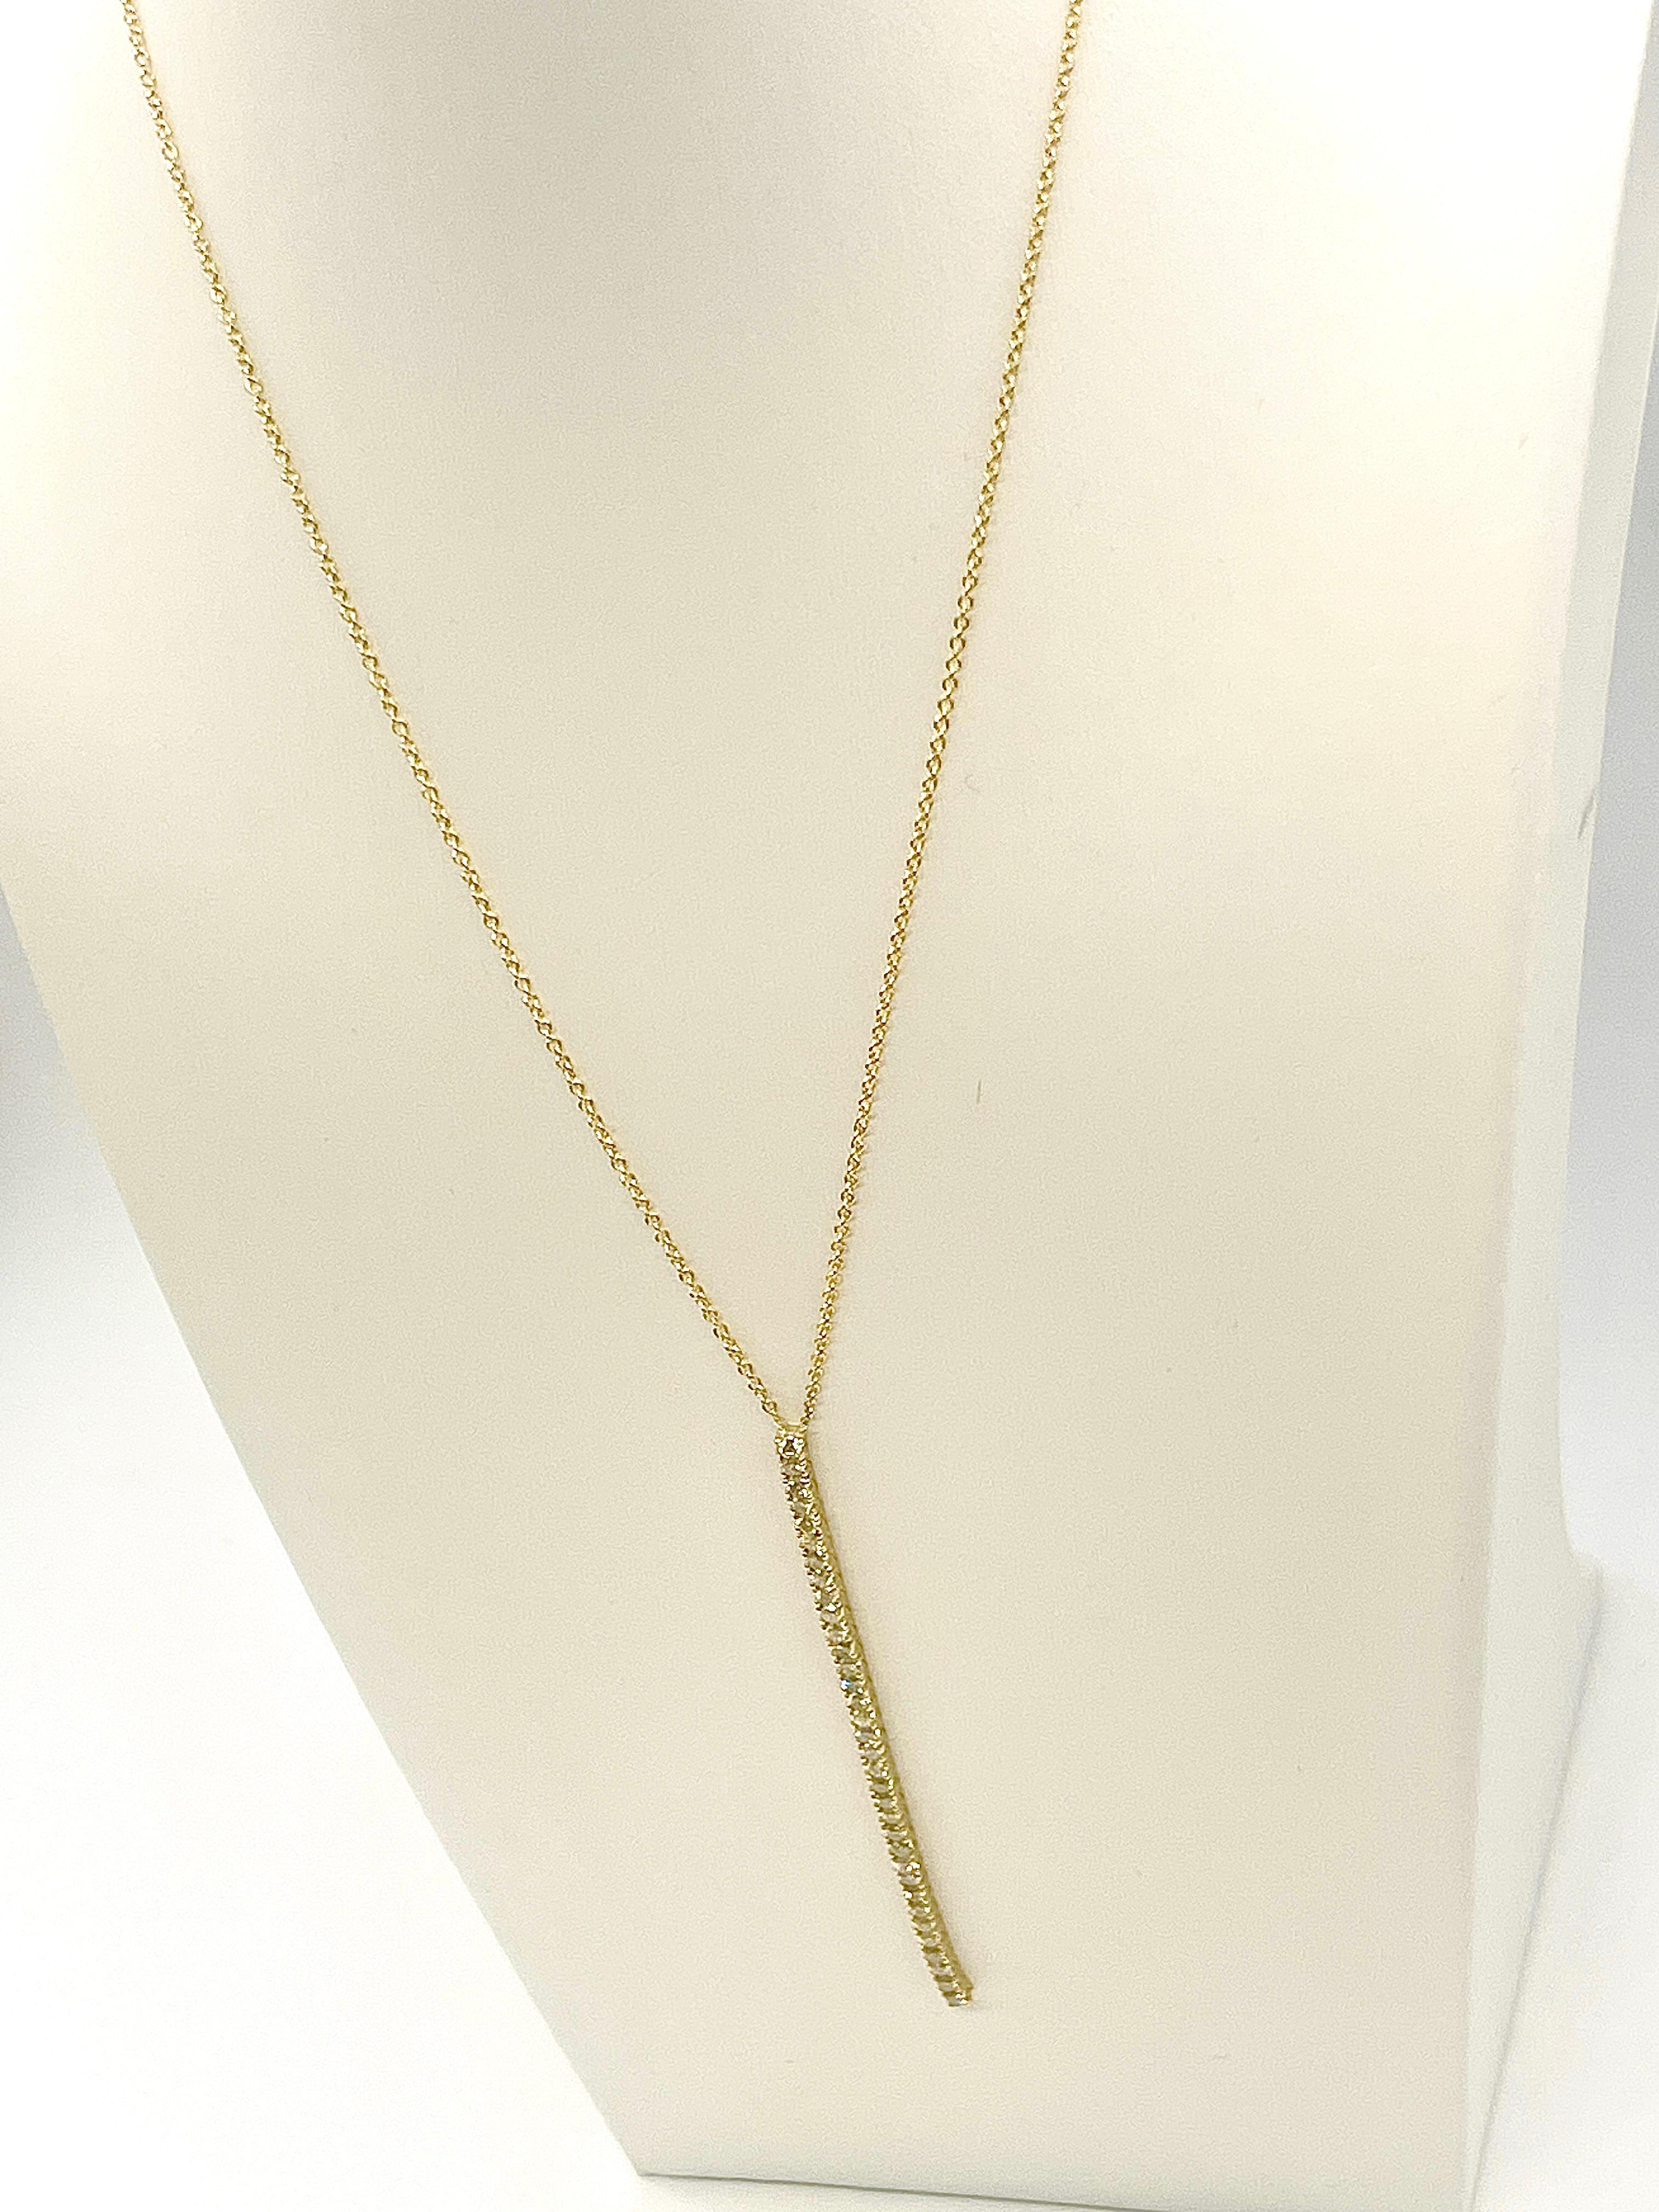 1.41 Carat All Natural Diamond Tennis Drop Necklace in 14K Yellow Gold For Sale 1